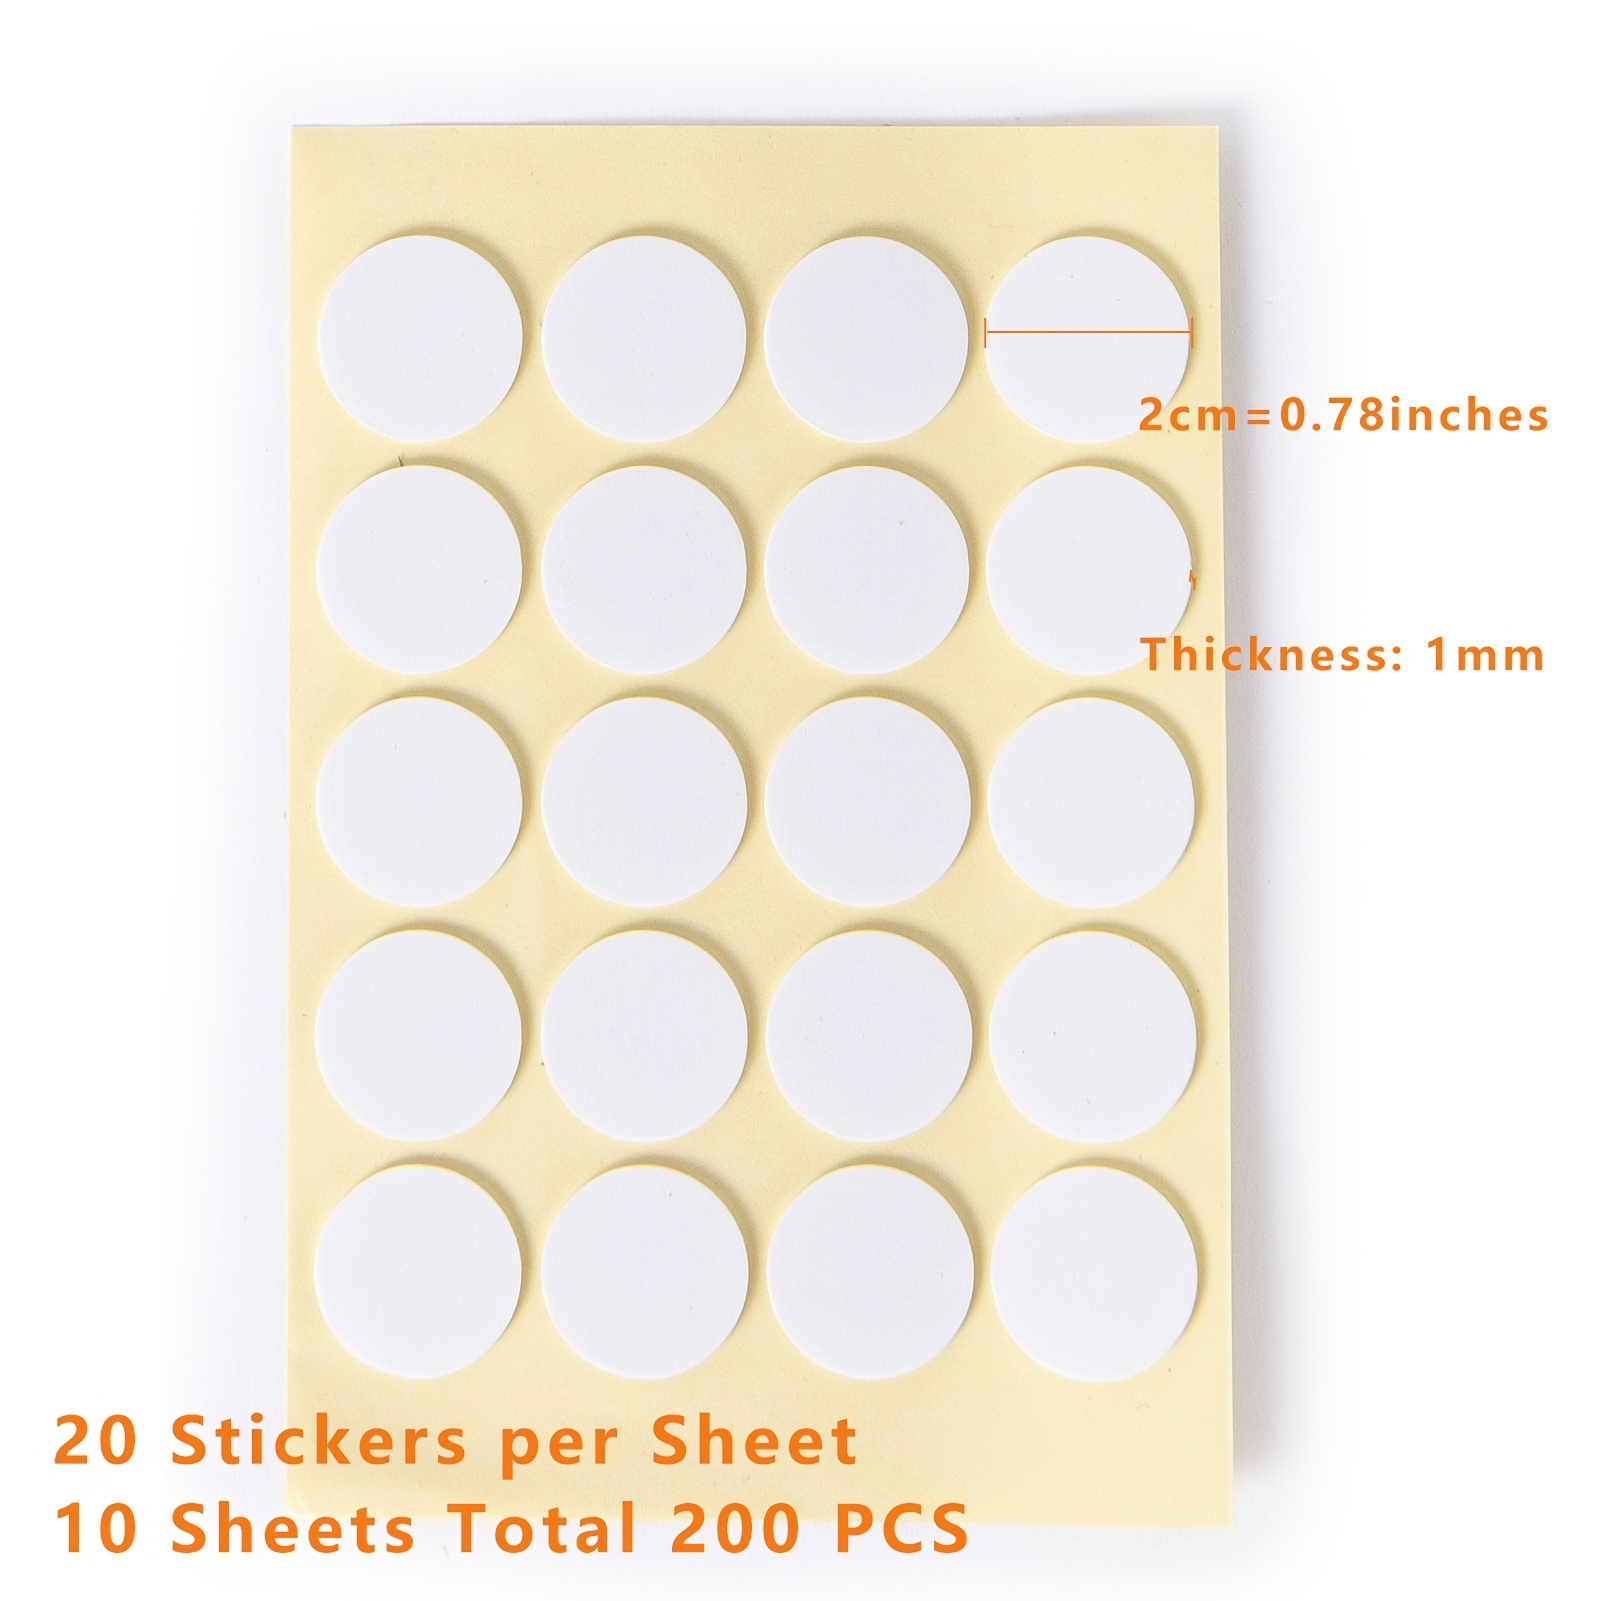 500 Pieces Candle Wick Stickers 2 mm Wax Stickers Candle Wick Double-Sided Stickers Heat Resistance Glue for Candle Making (White)